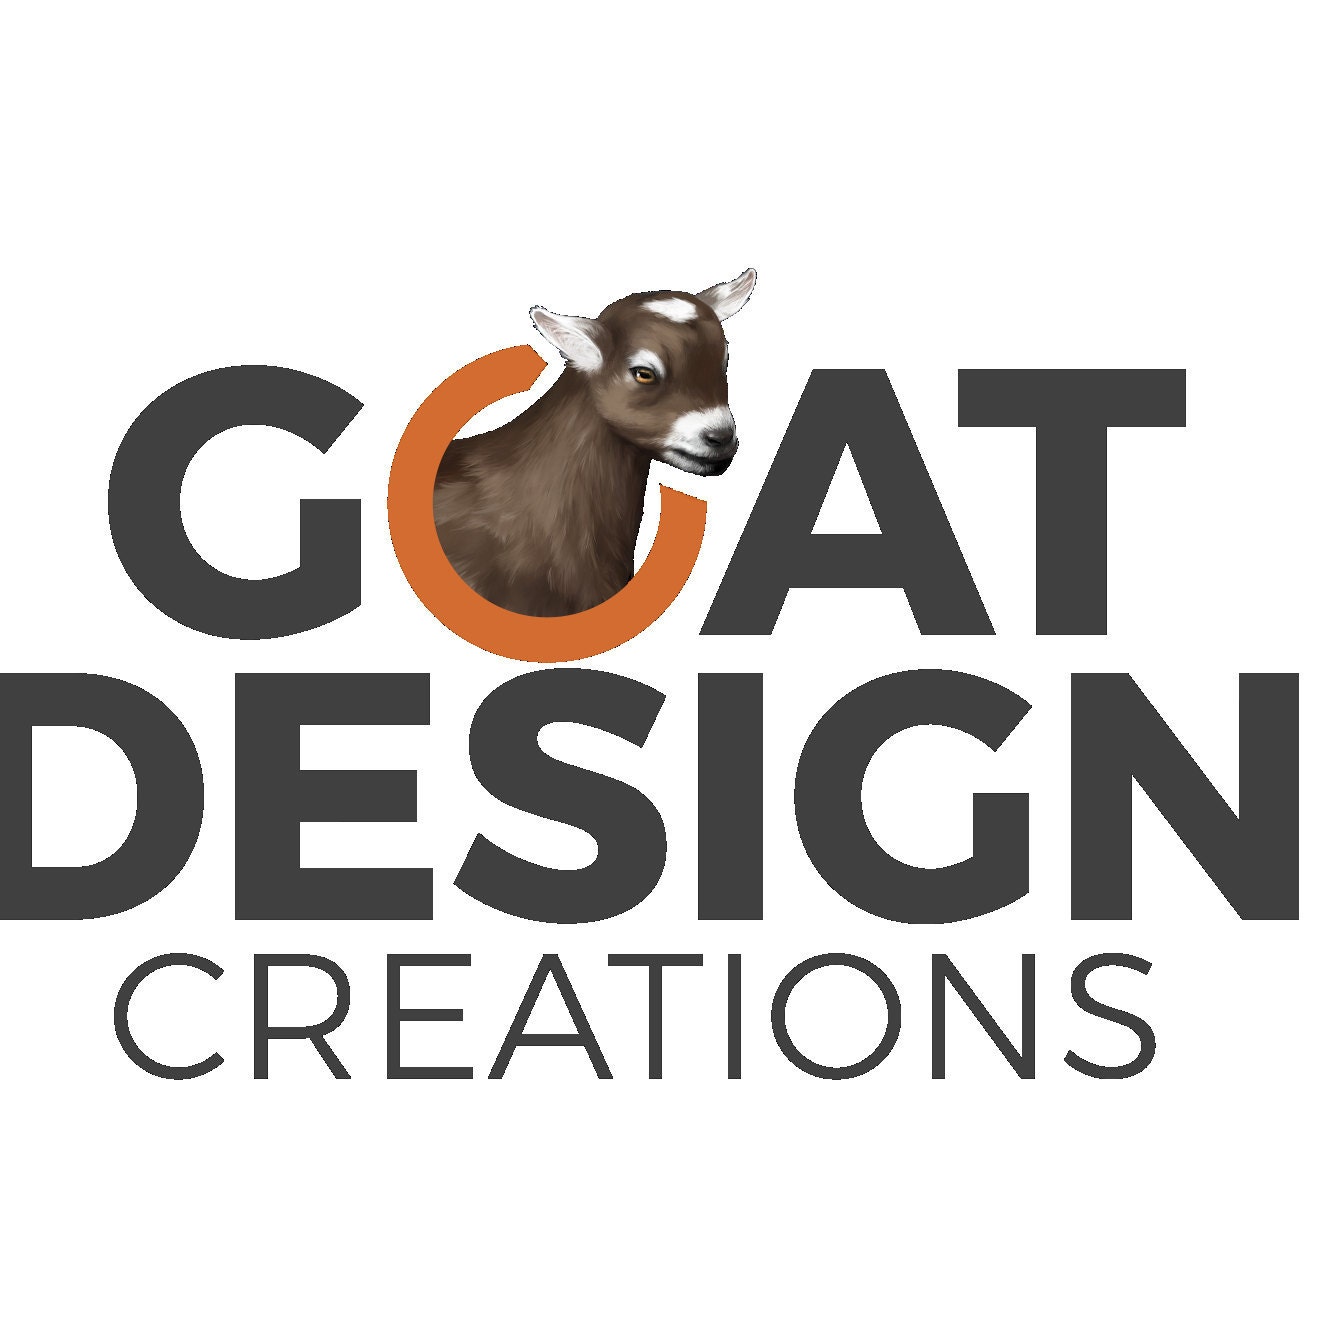 Goat themed gifts for everyone by Goatdesignscreations on Etsy